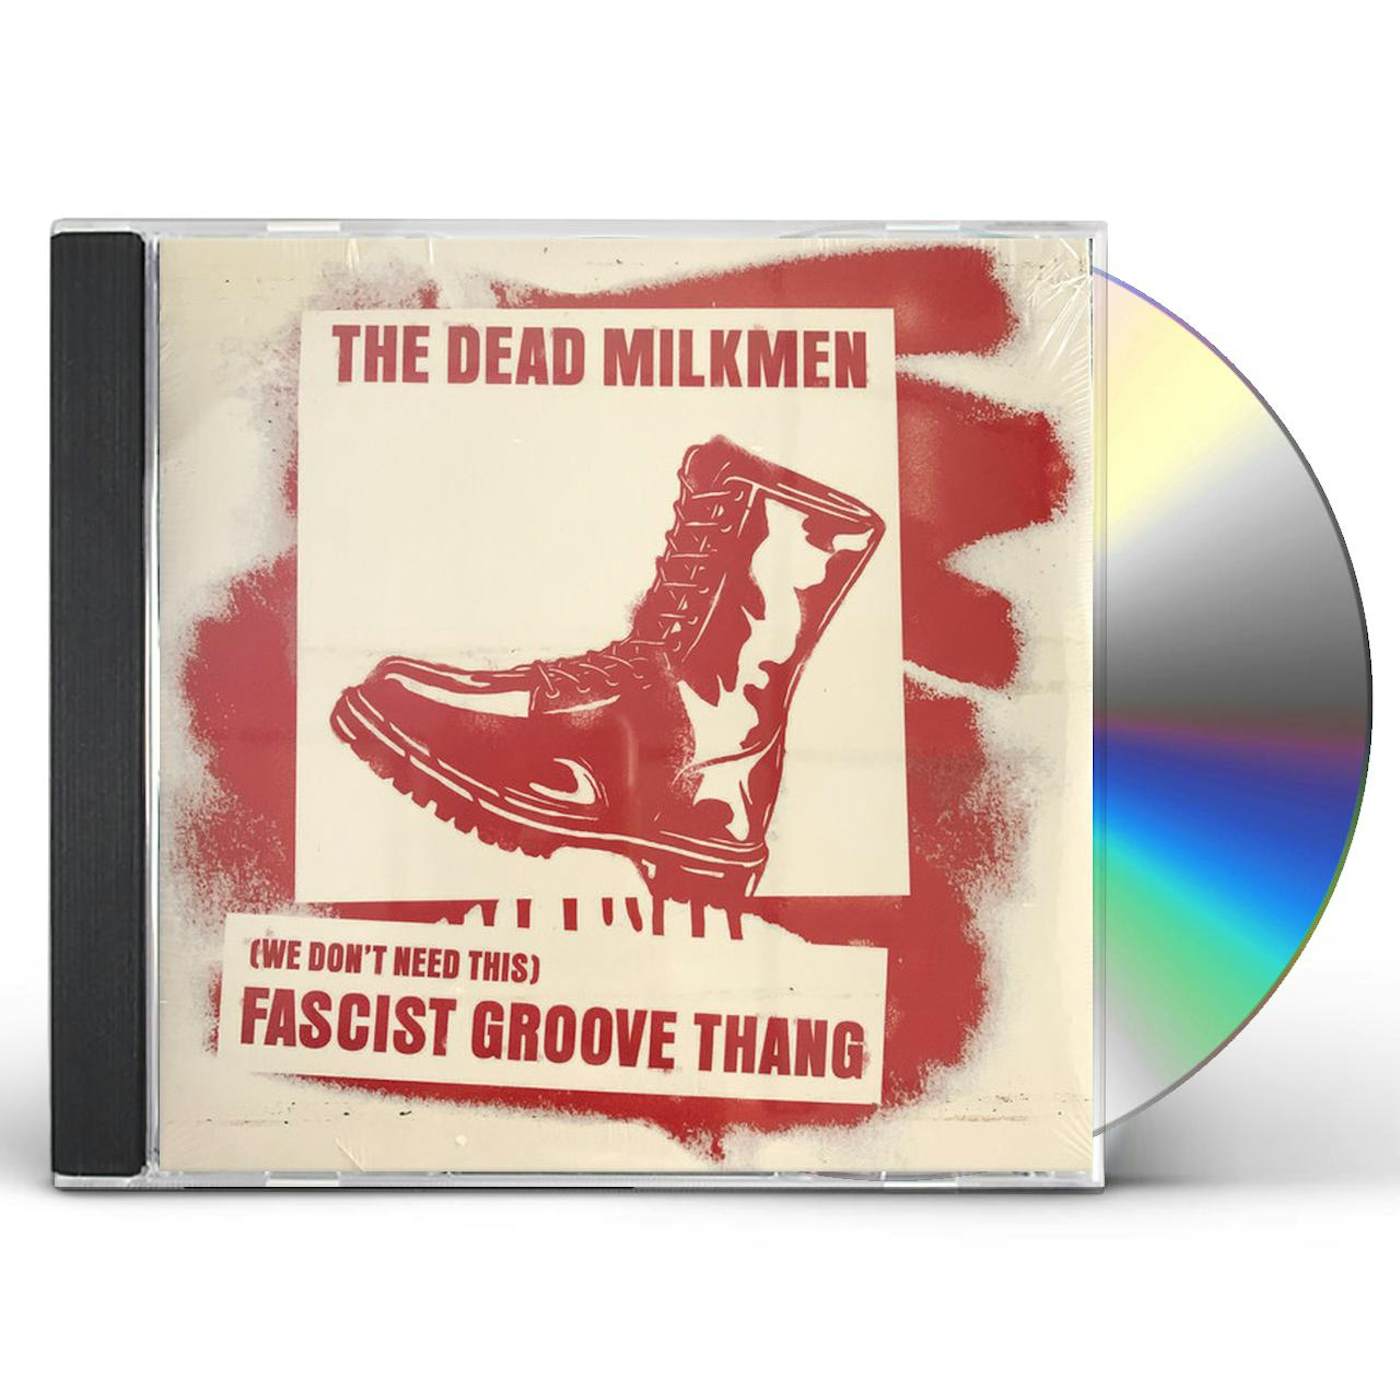 The Dead Milkmen (WE DON'T NEED THIS) FASCIST GROOVE THANG Vinyl Record